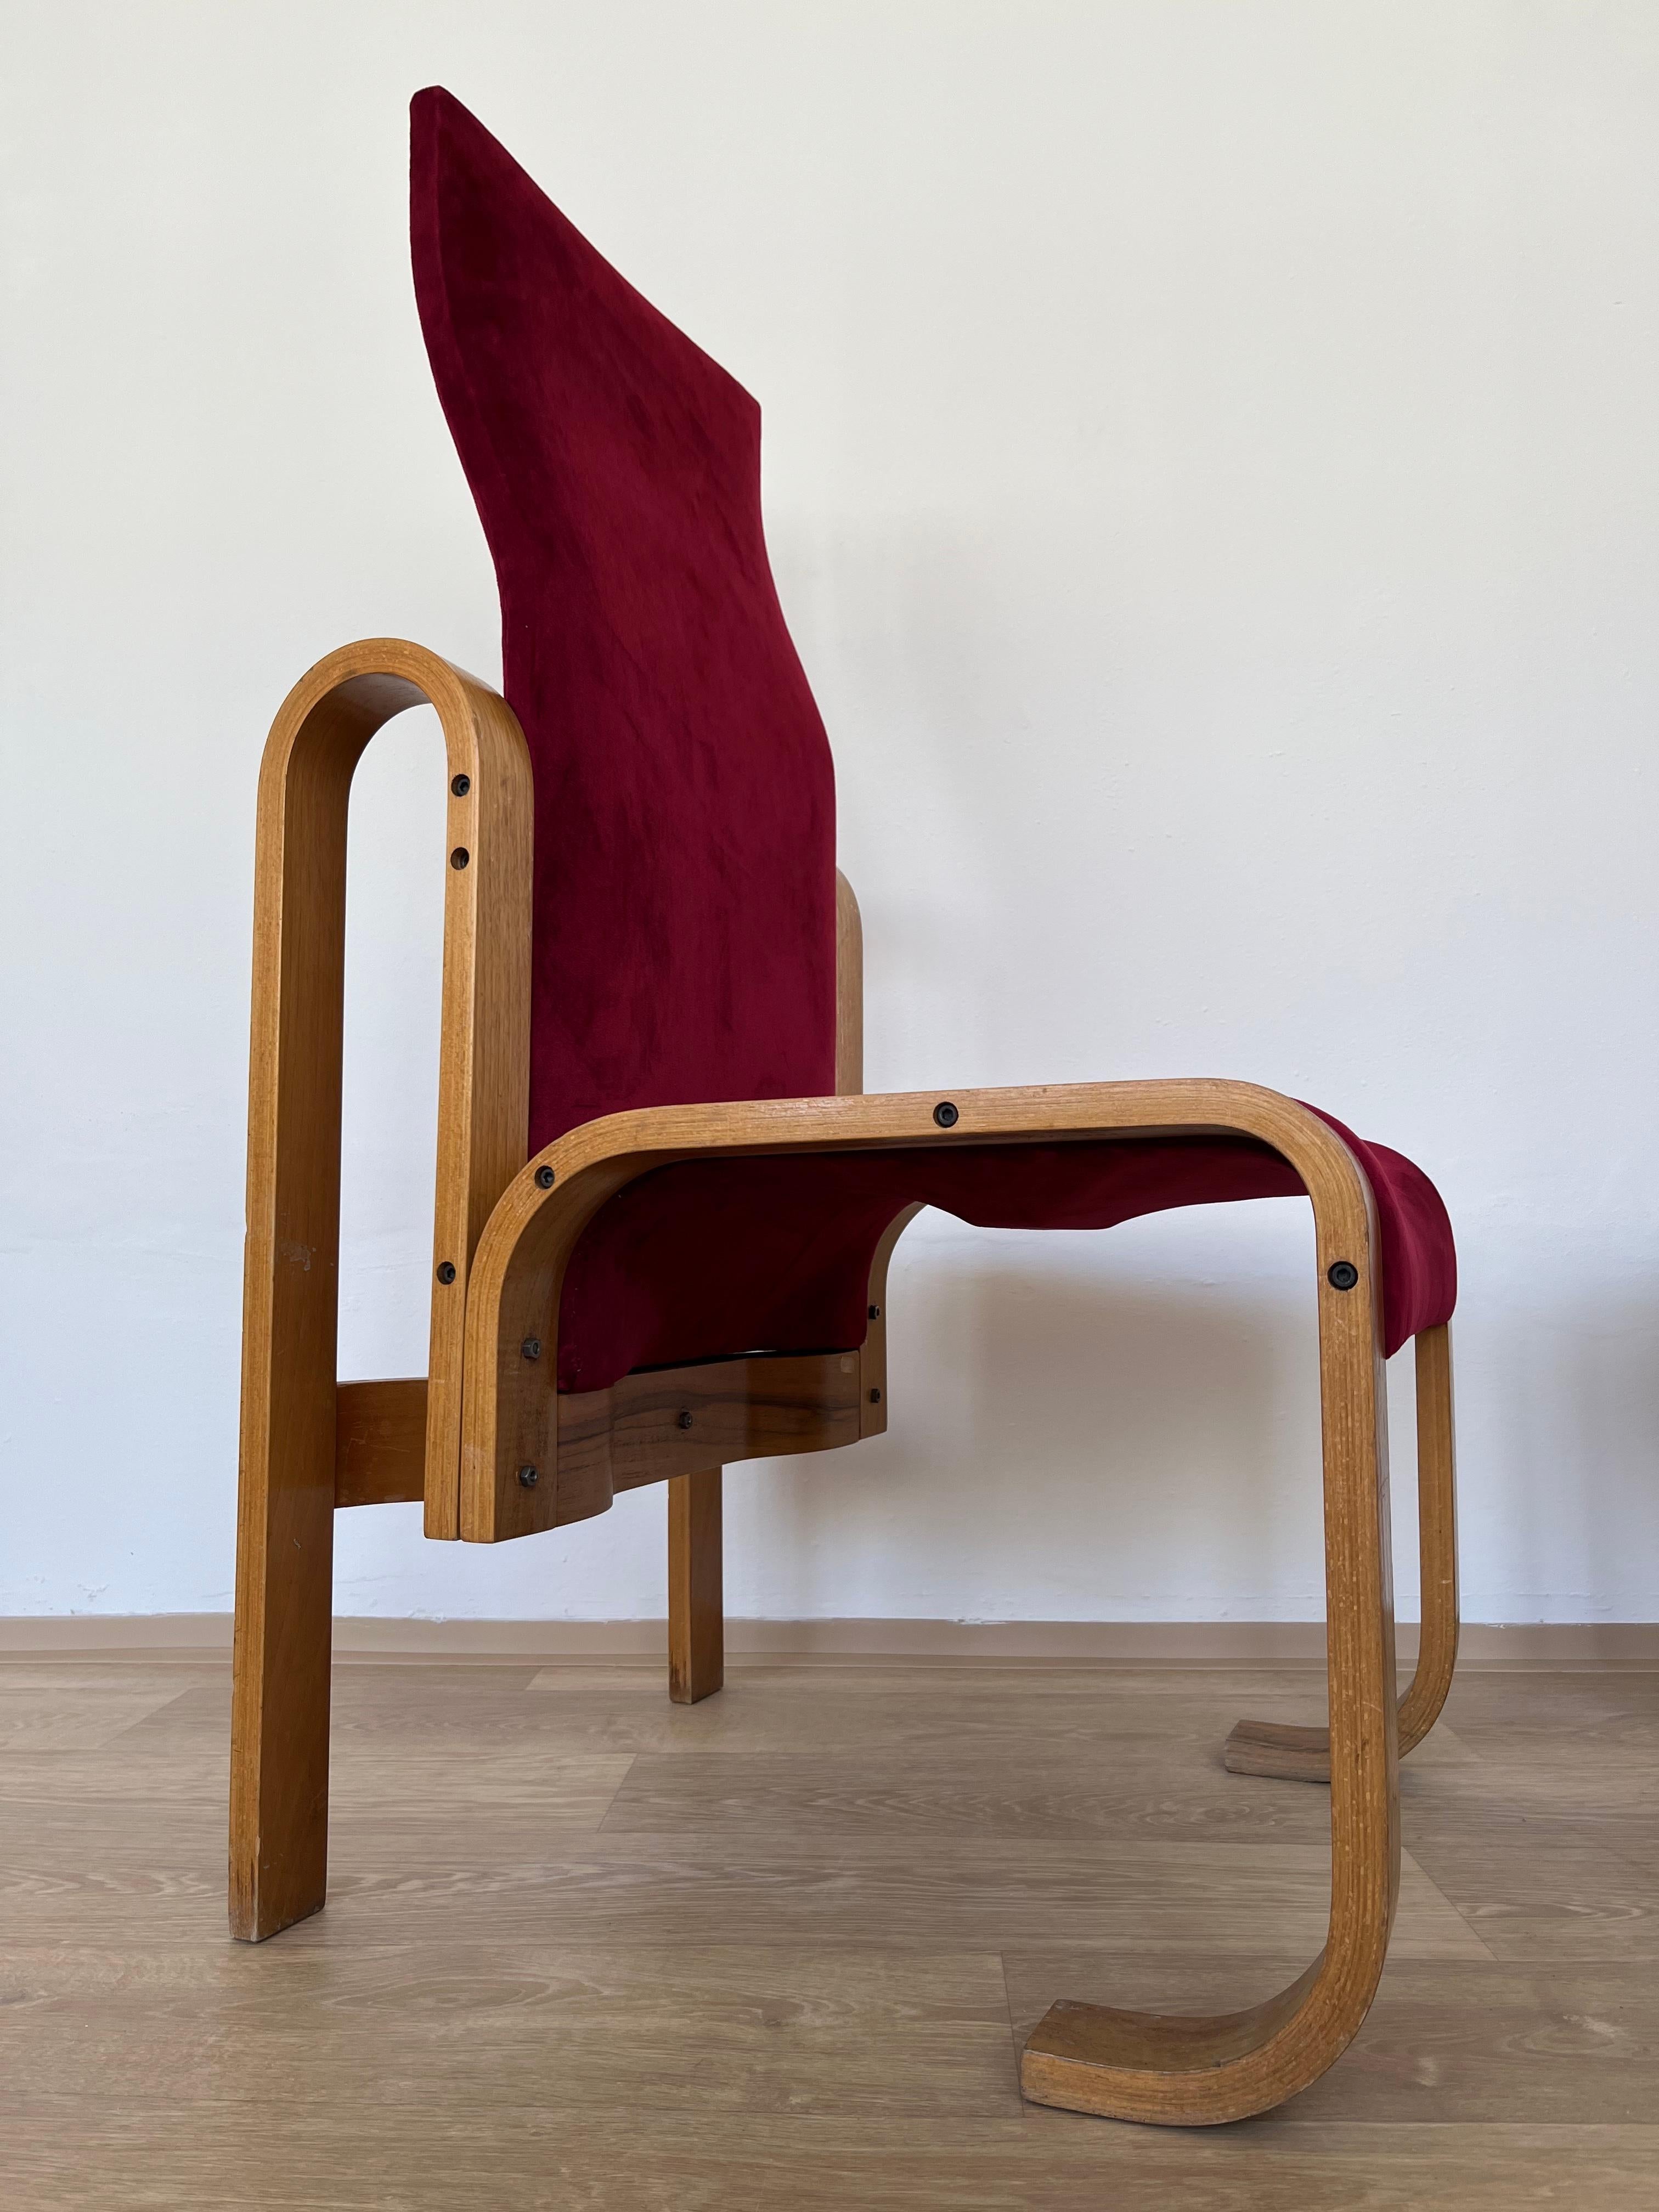 This chair was designed by Jan Bocan, the award-winning architect behind the Czechoslovakian embassy in Stockholm that was built in the late 1960s and early 1970s. He also designed the furniture, including this high back chair. This model has never